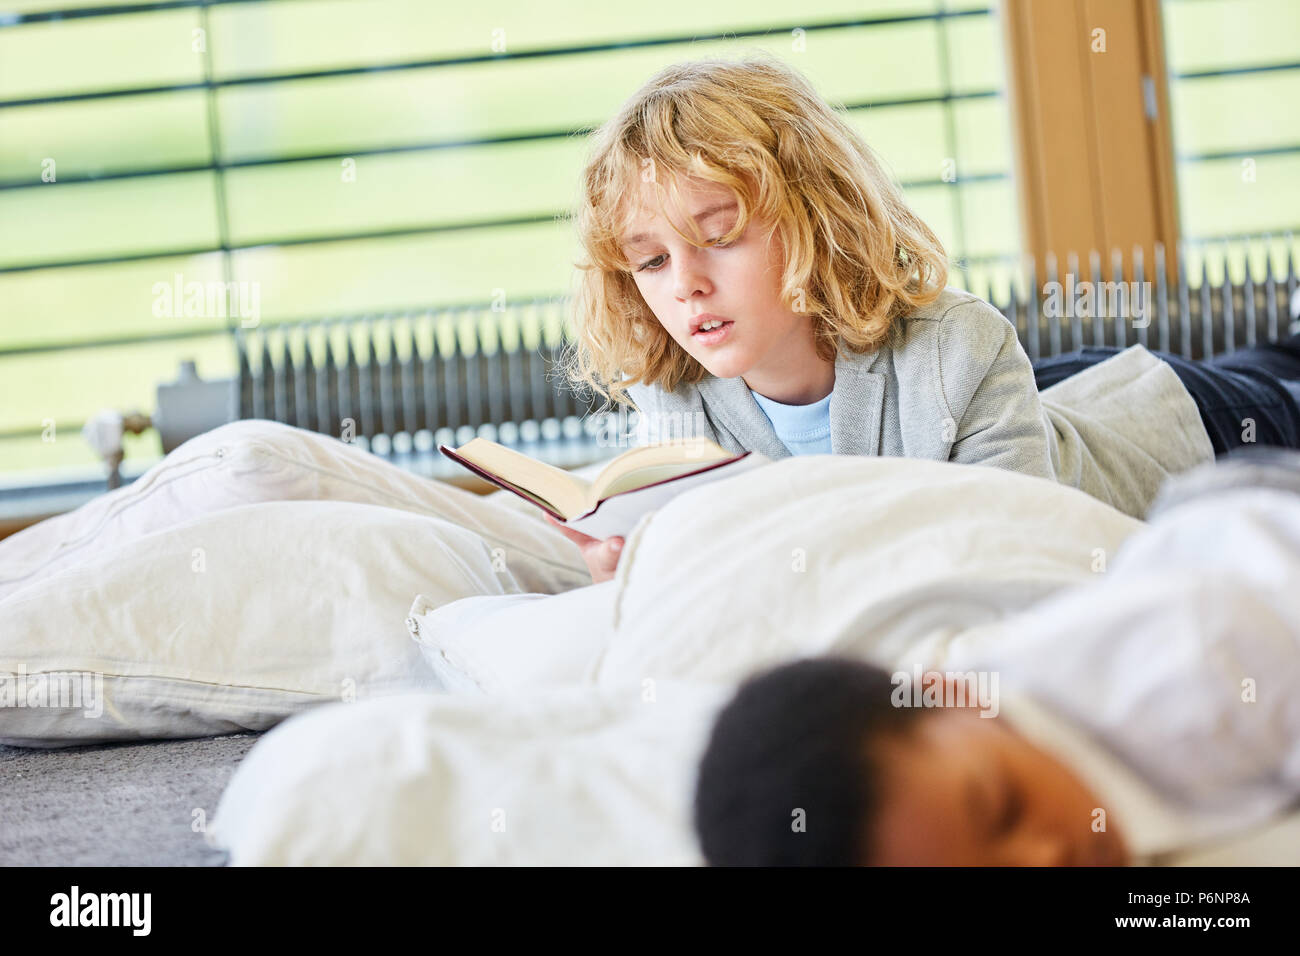 Blond boy reads concentrated in a storybook or non-fiction book Stock Photo